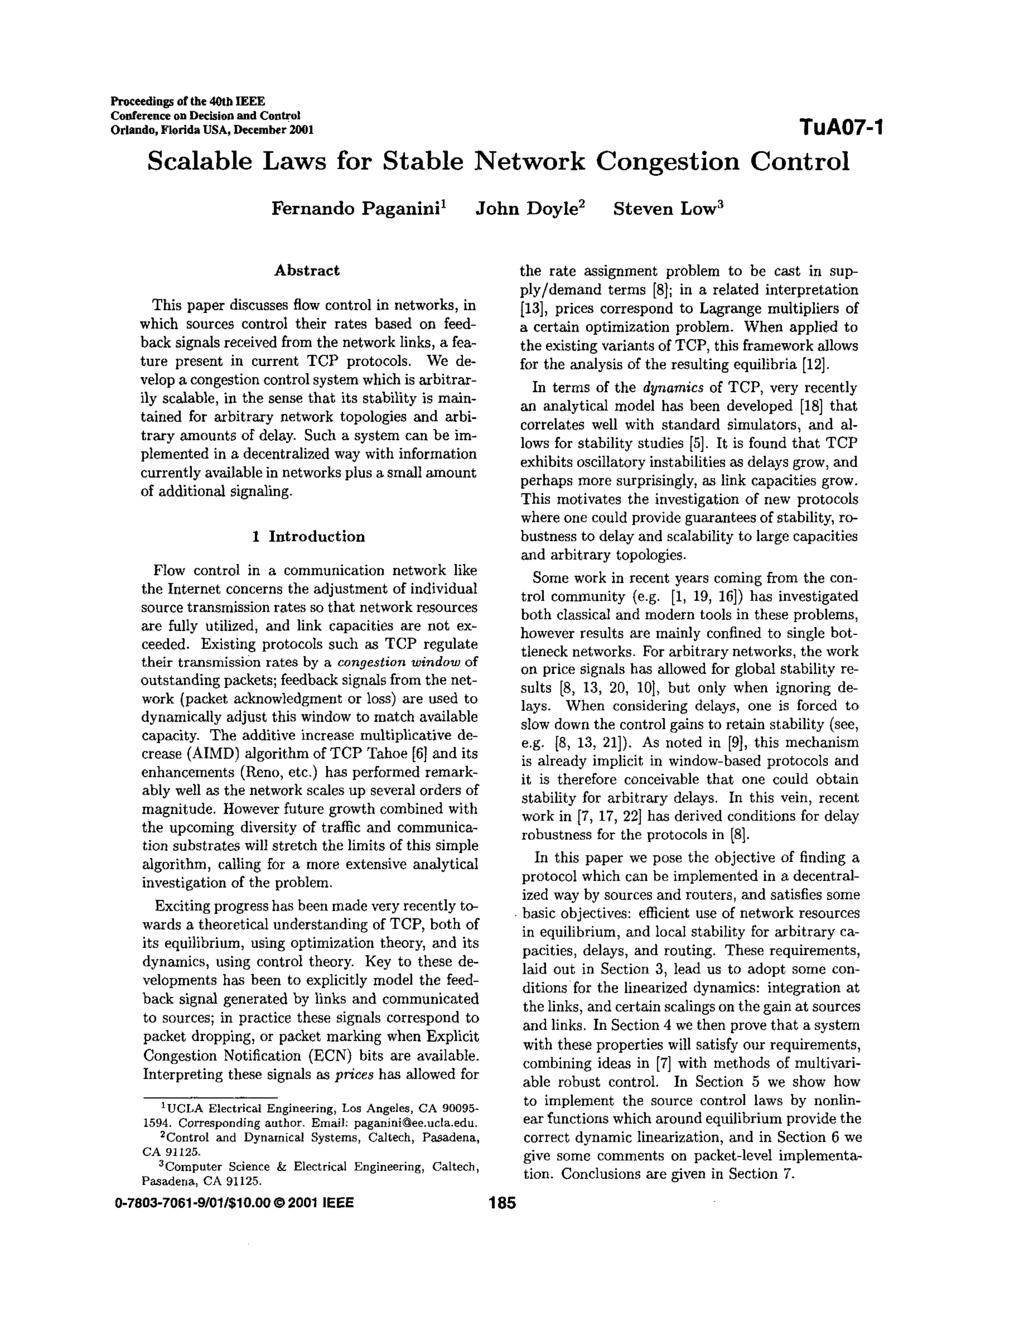 Roeeediog of the 40th IEEE Conference on Decision and Conel Orbdo, Florida USA, December 200 Scalable Laws for Stable Network Congestion Control Fernando Paganinil John Doyle2 Steven Low3 Abstract